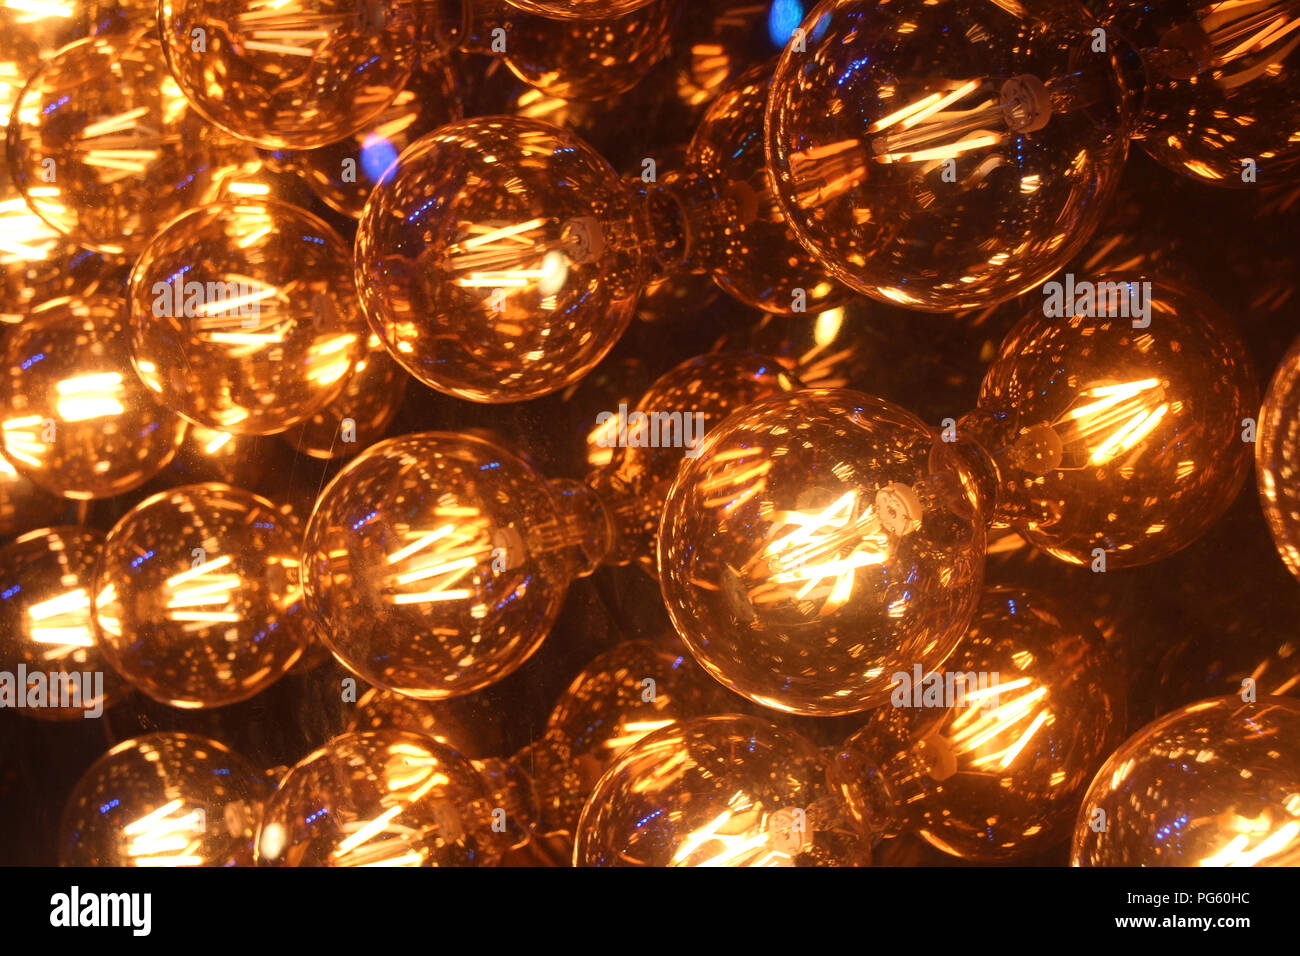 Many amber yellow warm color incandescent light bulbs, tungsten light bulbs, light up as a inspiring pattern background Stock Photo